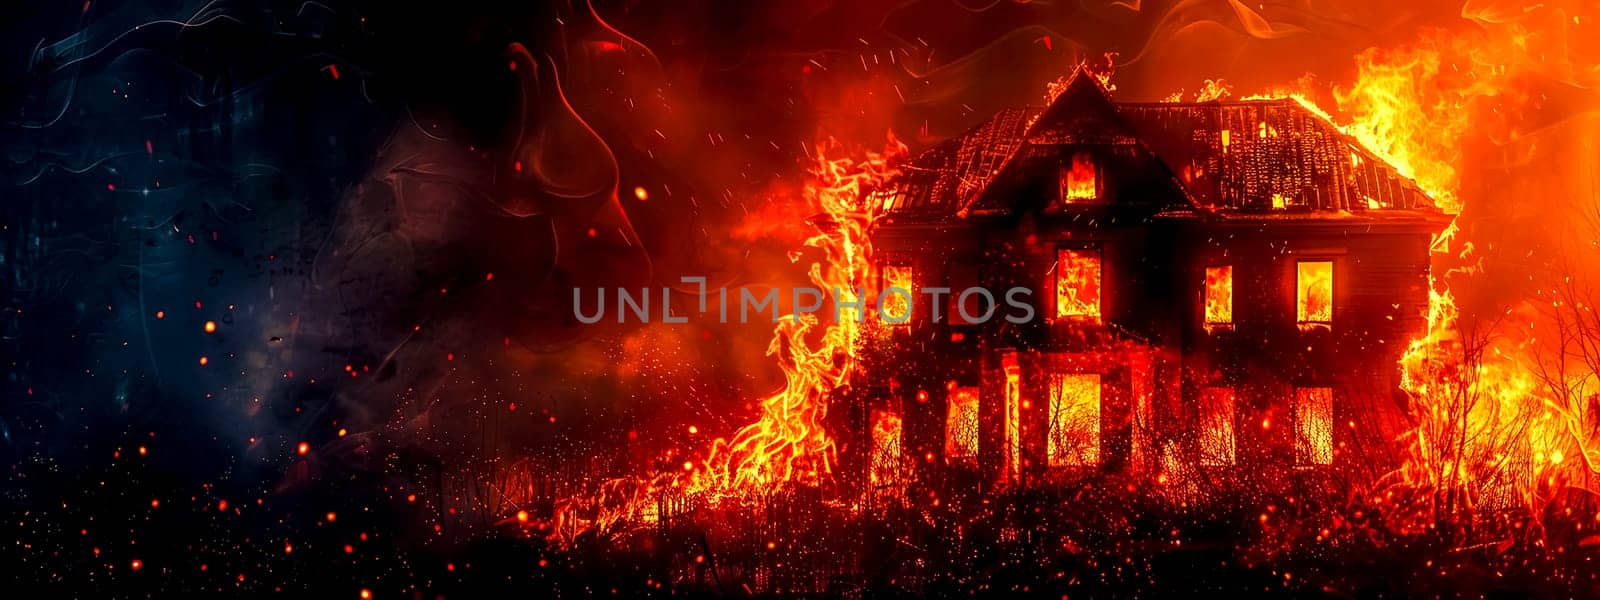 A fiery blaze consumes an old, empty manor amid a dark, smoky background